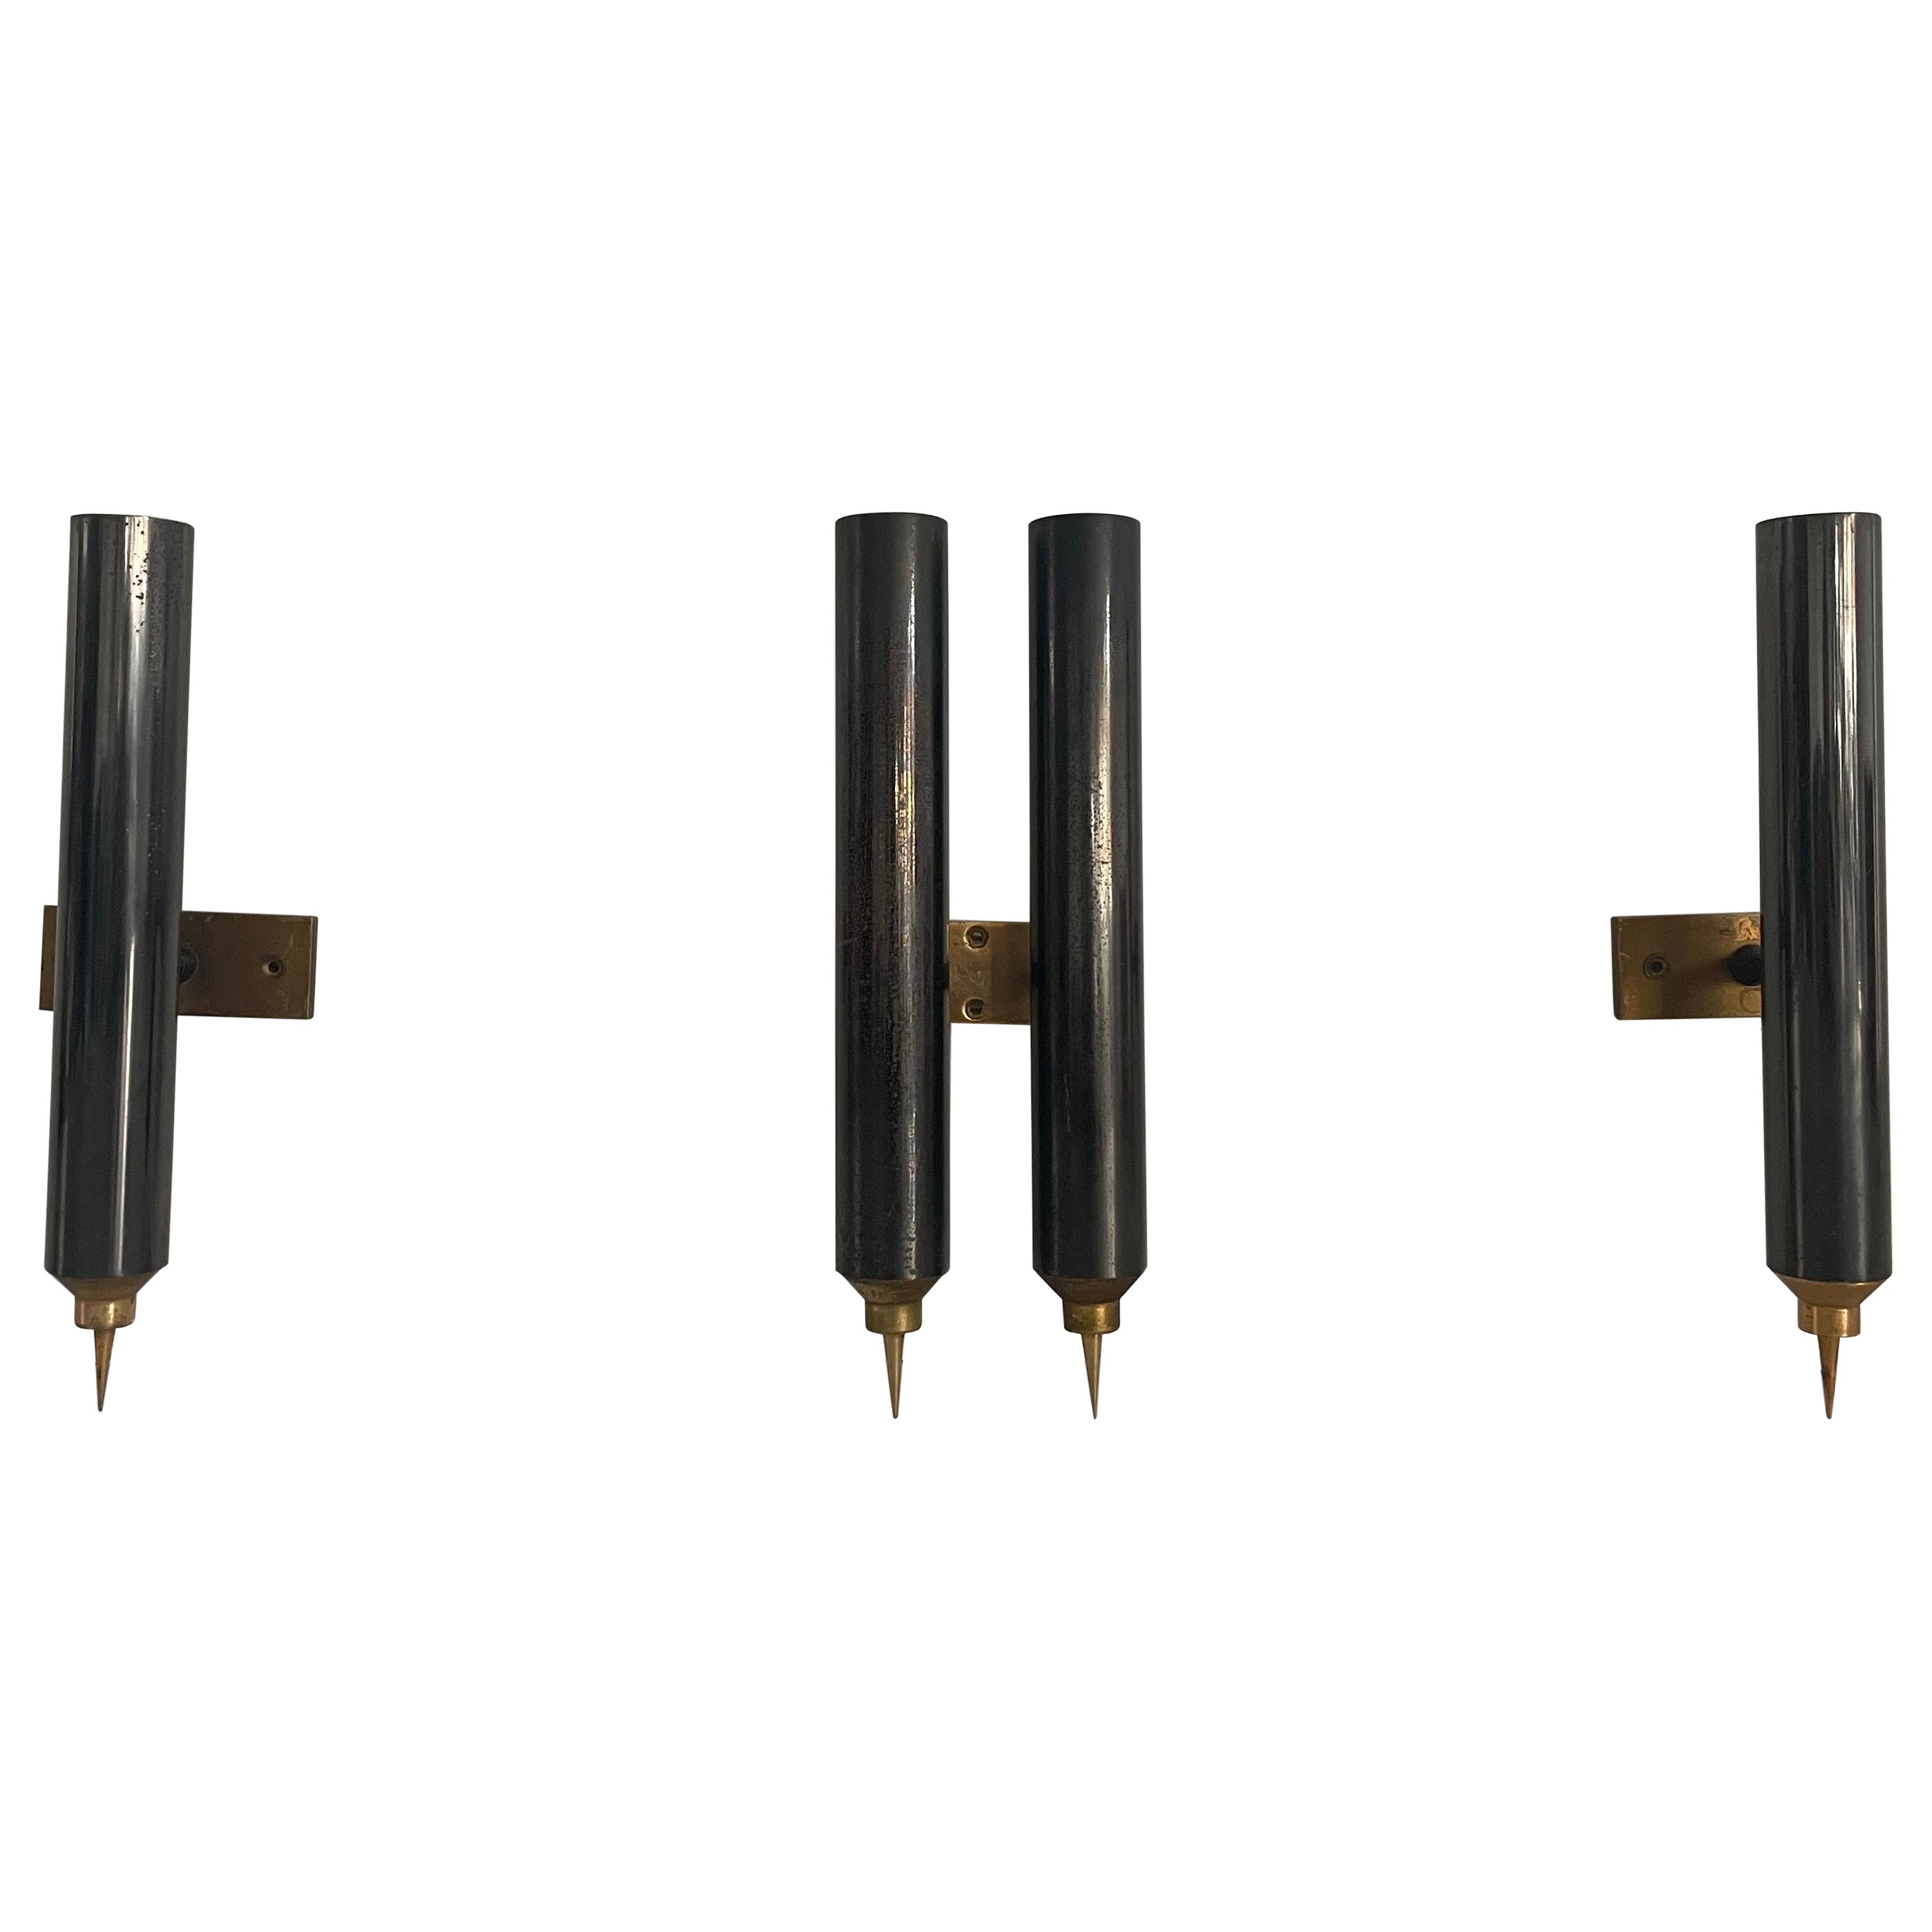 Set of 3 Modernist Tube Design Wall Sconces, 1960s, Italy For Sale